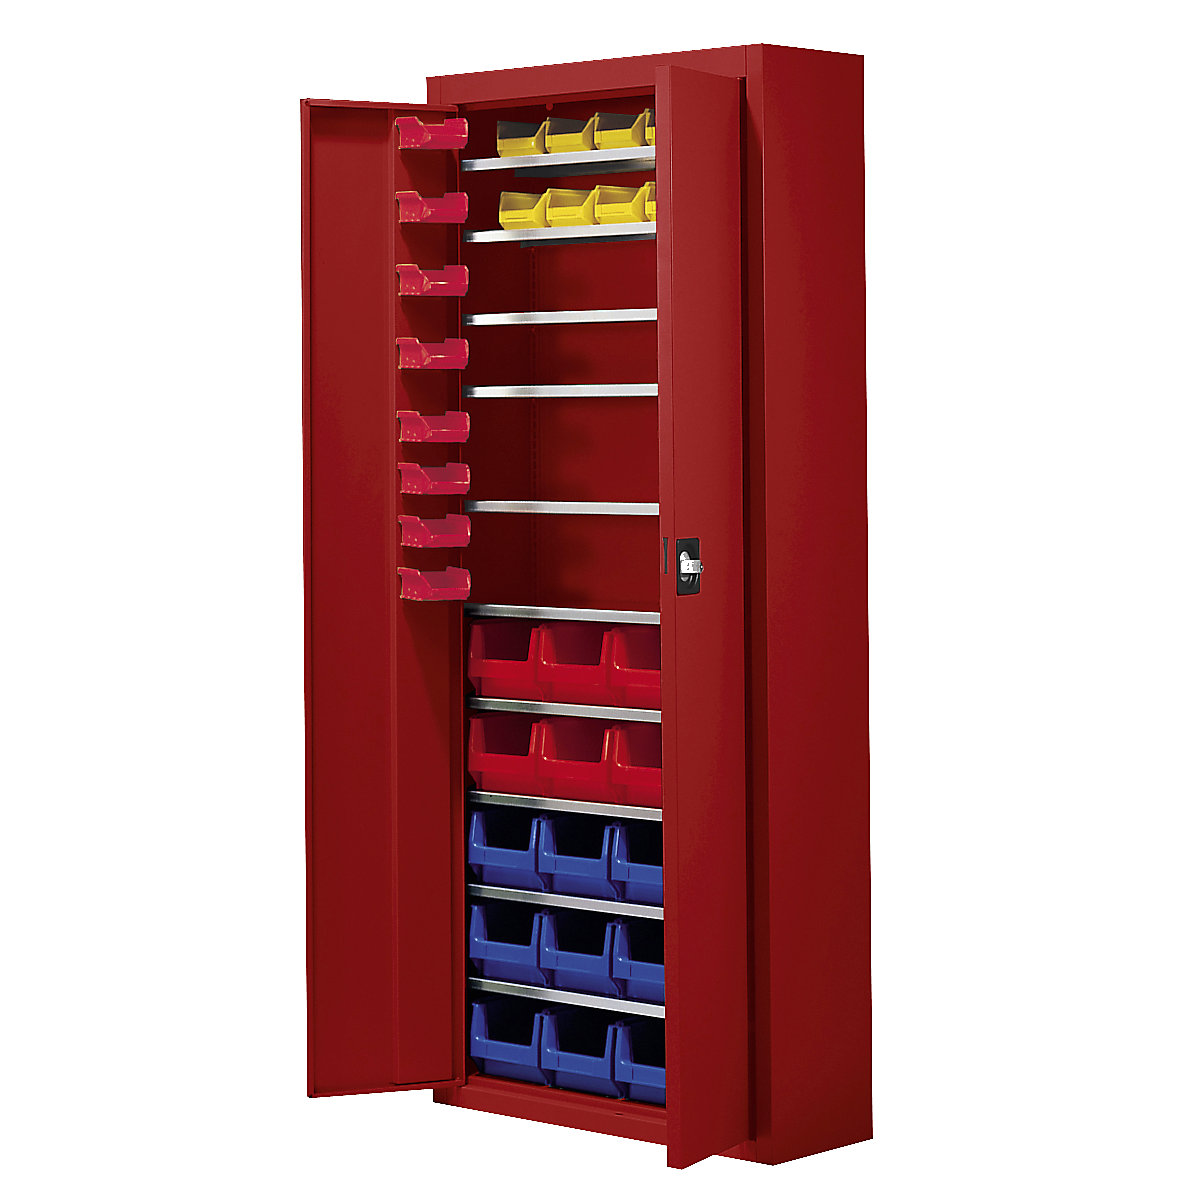 Storage cupboard with open fronted storage bins – mauser, HxWxD 1740 x 680 x 280 mm, 48 bins, single colour, flame red, 3+ items-6